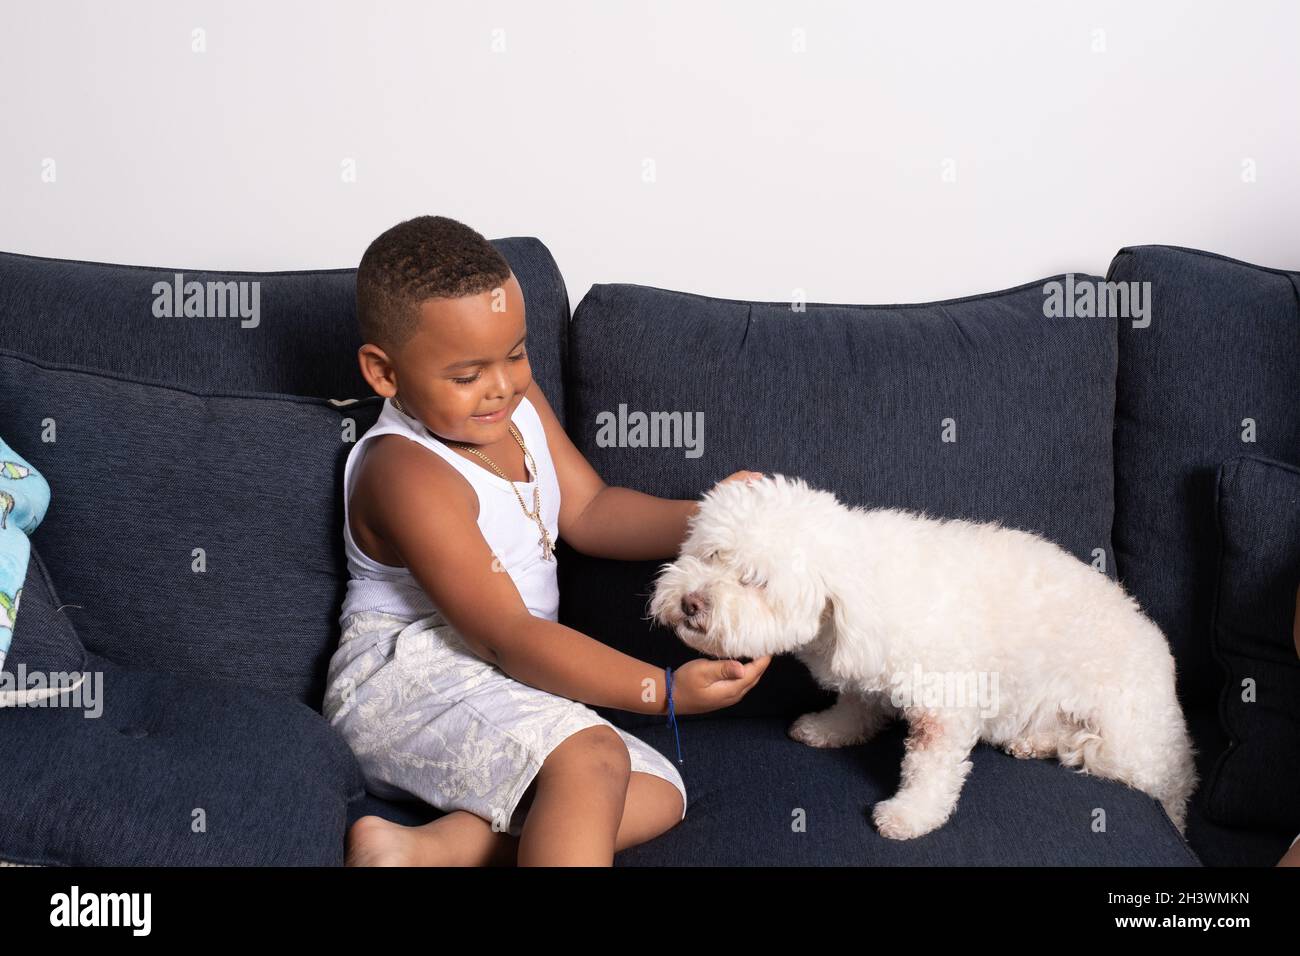 Preschool age boy at home on couch with pet dog Stock Photo